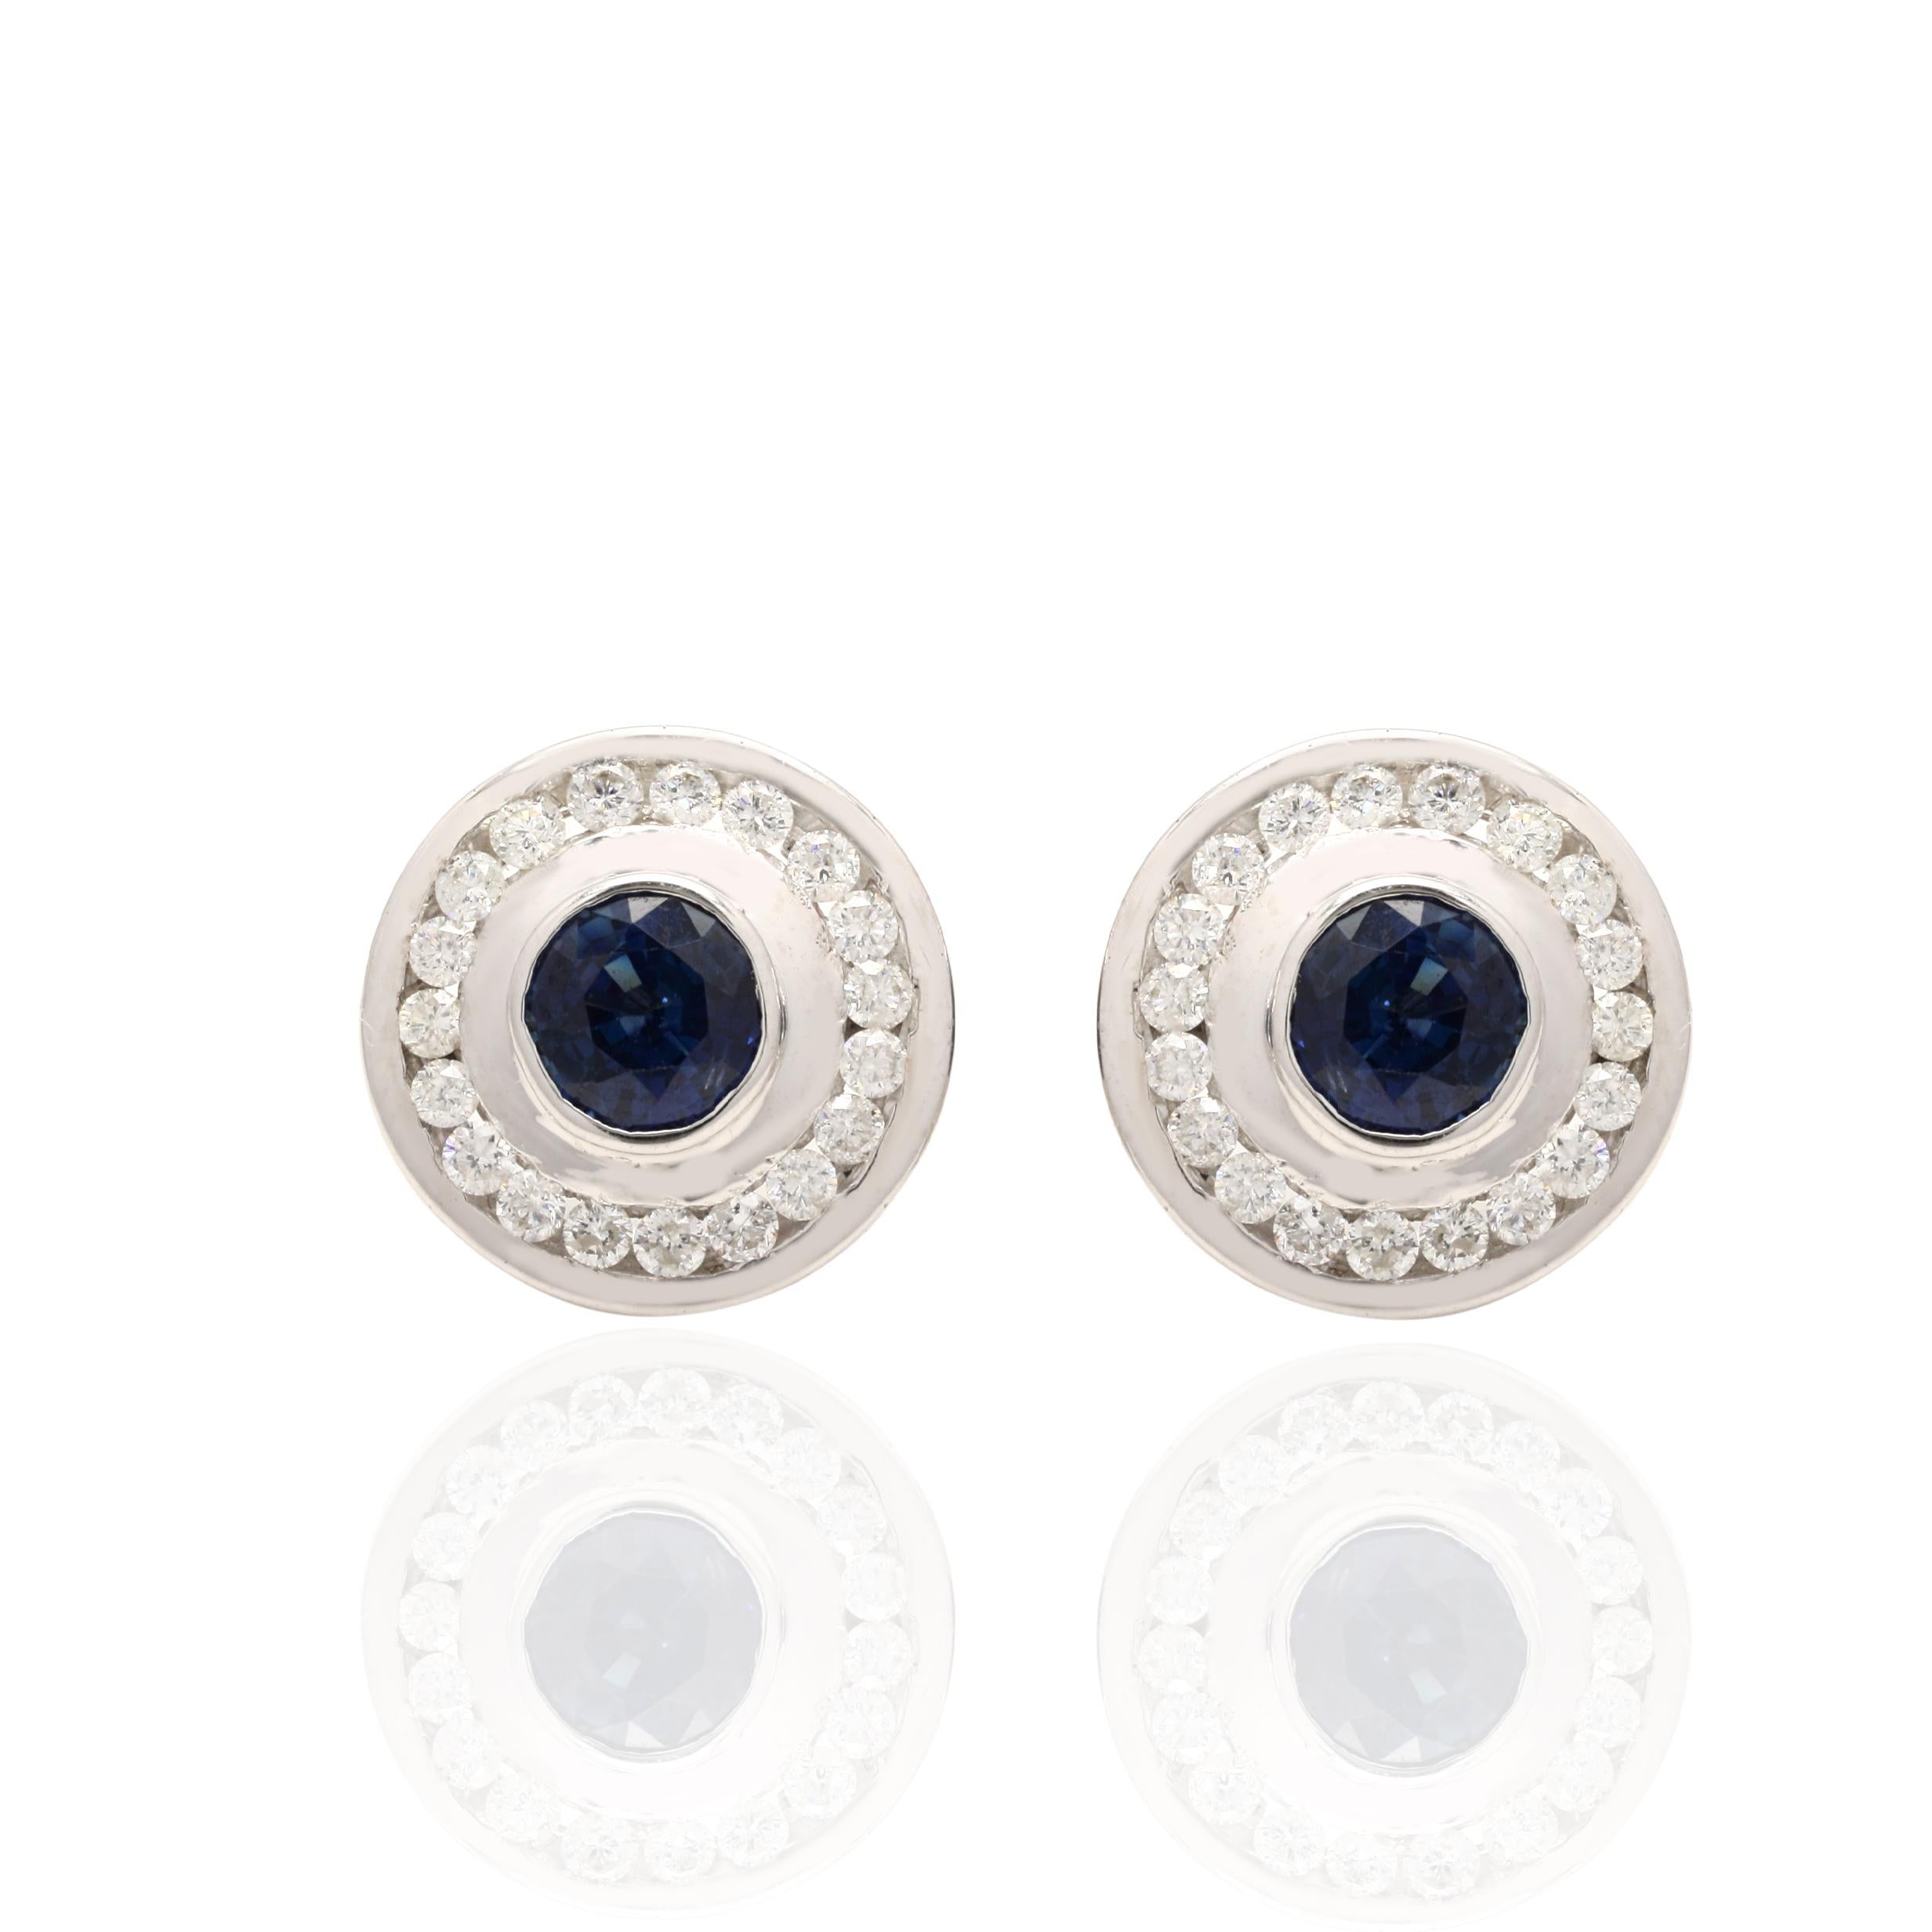 Round Cut Blue Sapphire Studs with Diamonds in 14K Gold. Embrace your look with these stunning pair of earrings suitable for any occasion to complete your outfit.
Studs create a subtle beauty while showcasing the colors of the natural precious